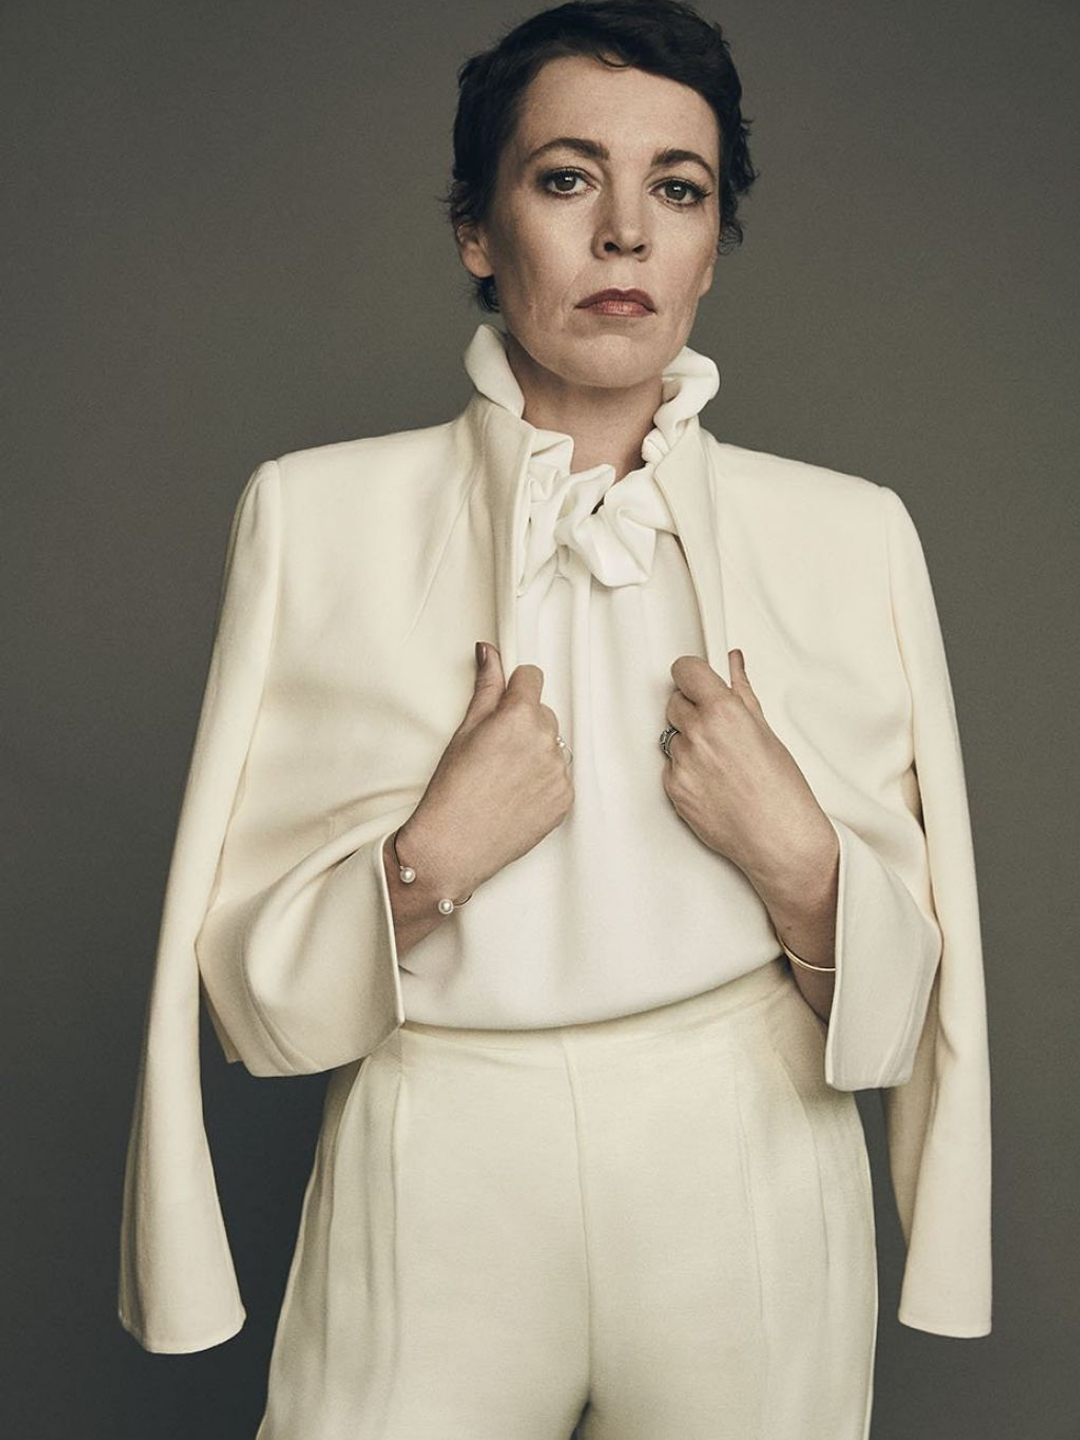 Olivia Colman how old is she